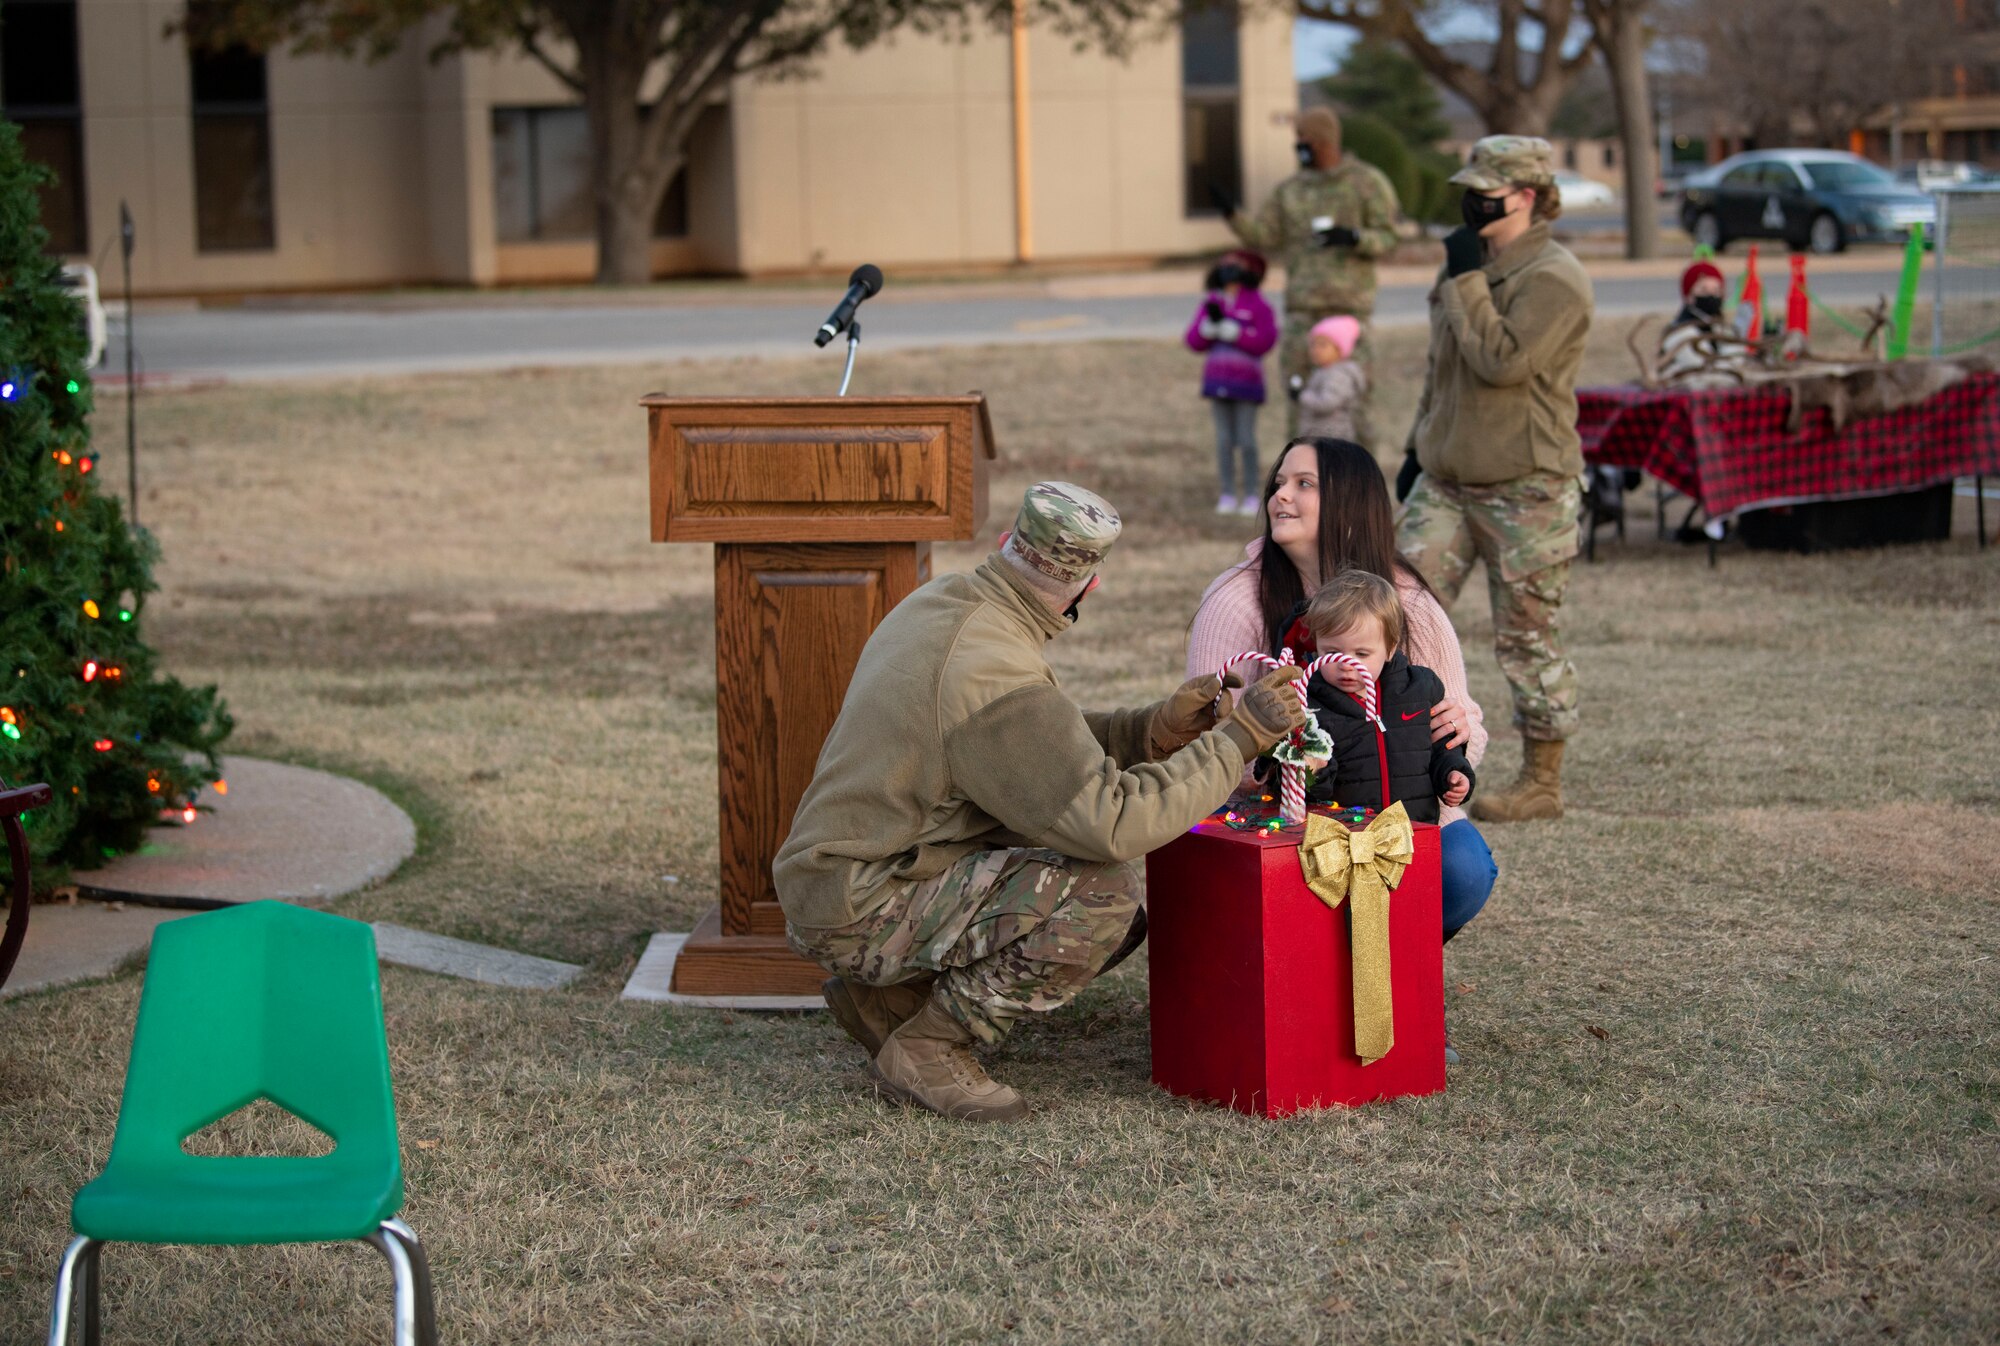 Kaitlynn Reinsch, the wife of Staff Sgt. Dakota Reinsch from the 97th Security Forces Squadron, their son, Ryan, and Col. David Vanderburg, 97th Mission Support Group commander, did the honors of activating the tree during the annual holiday tree lighting event, Dec. 3, 2020, at Altus Air Force Base, Oklahoma. Each year, a family of a deployed Airman is given the opportunity to join leadership in illuminating the lights on the tree. (U.S. Air Force photo by Airman 1st Class Amanda Lovelace)